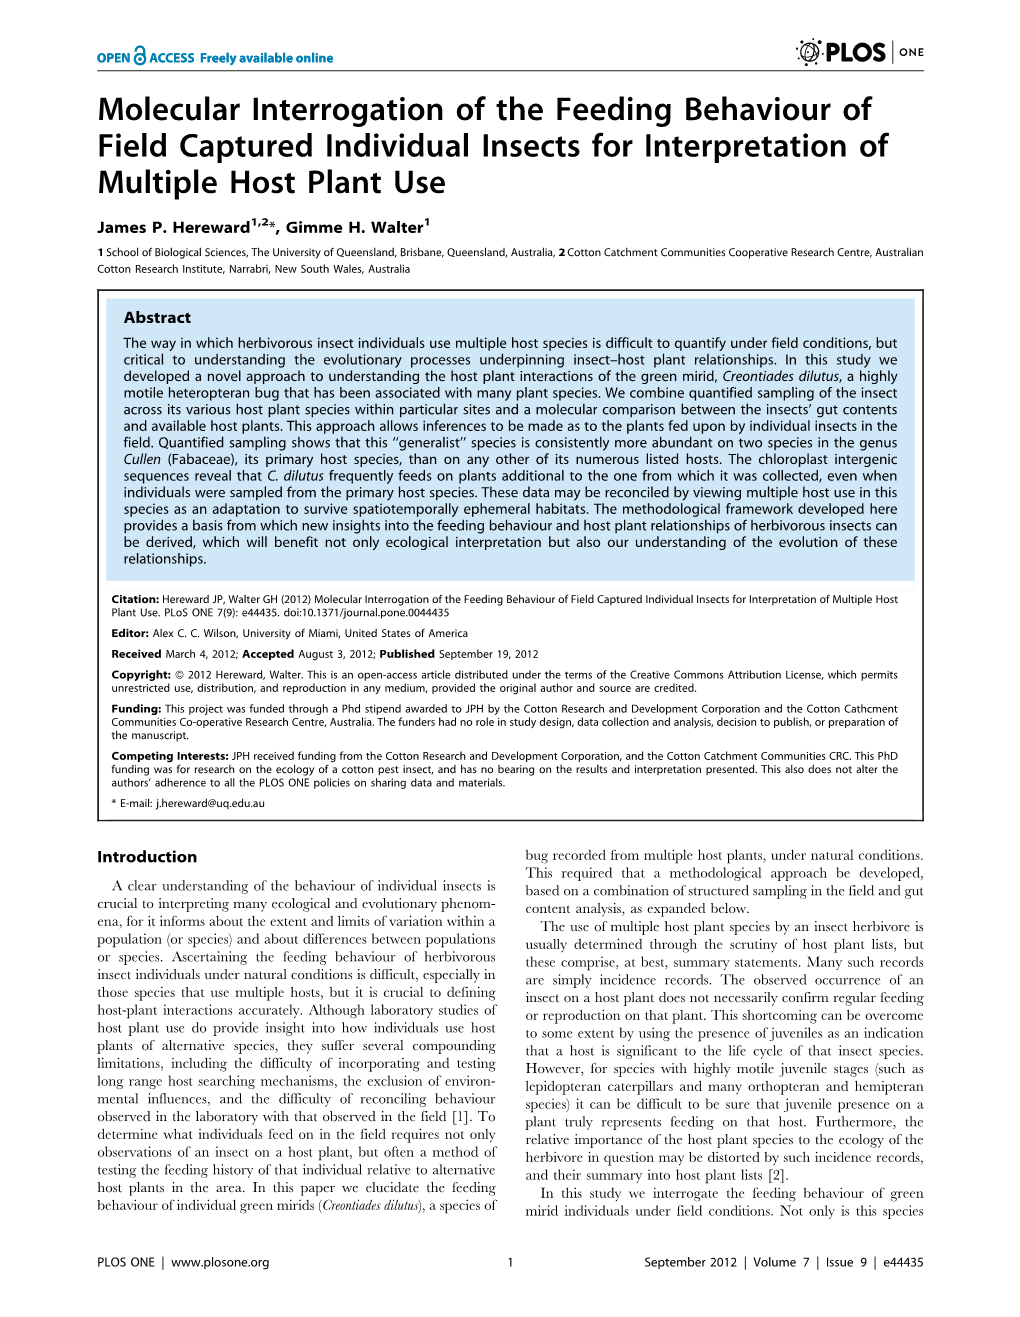 Molecular Interrogation of the Feeding Behaviour of Field Captured Individual Insects for Interpretation of Multiple Host Plant Use